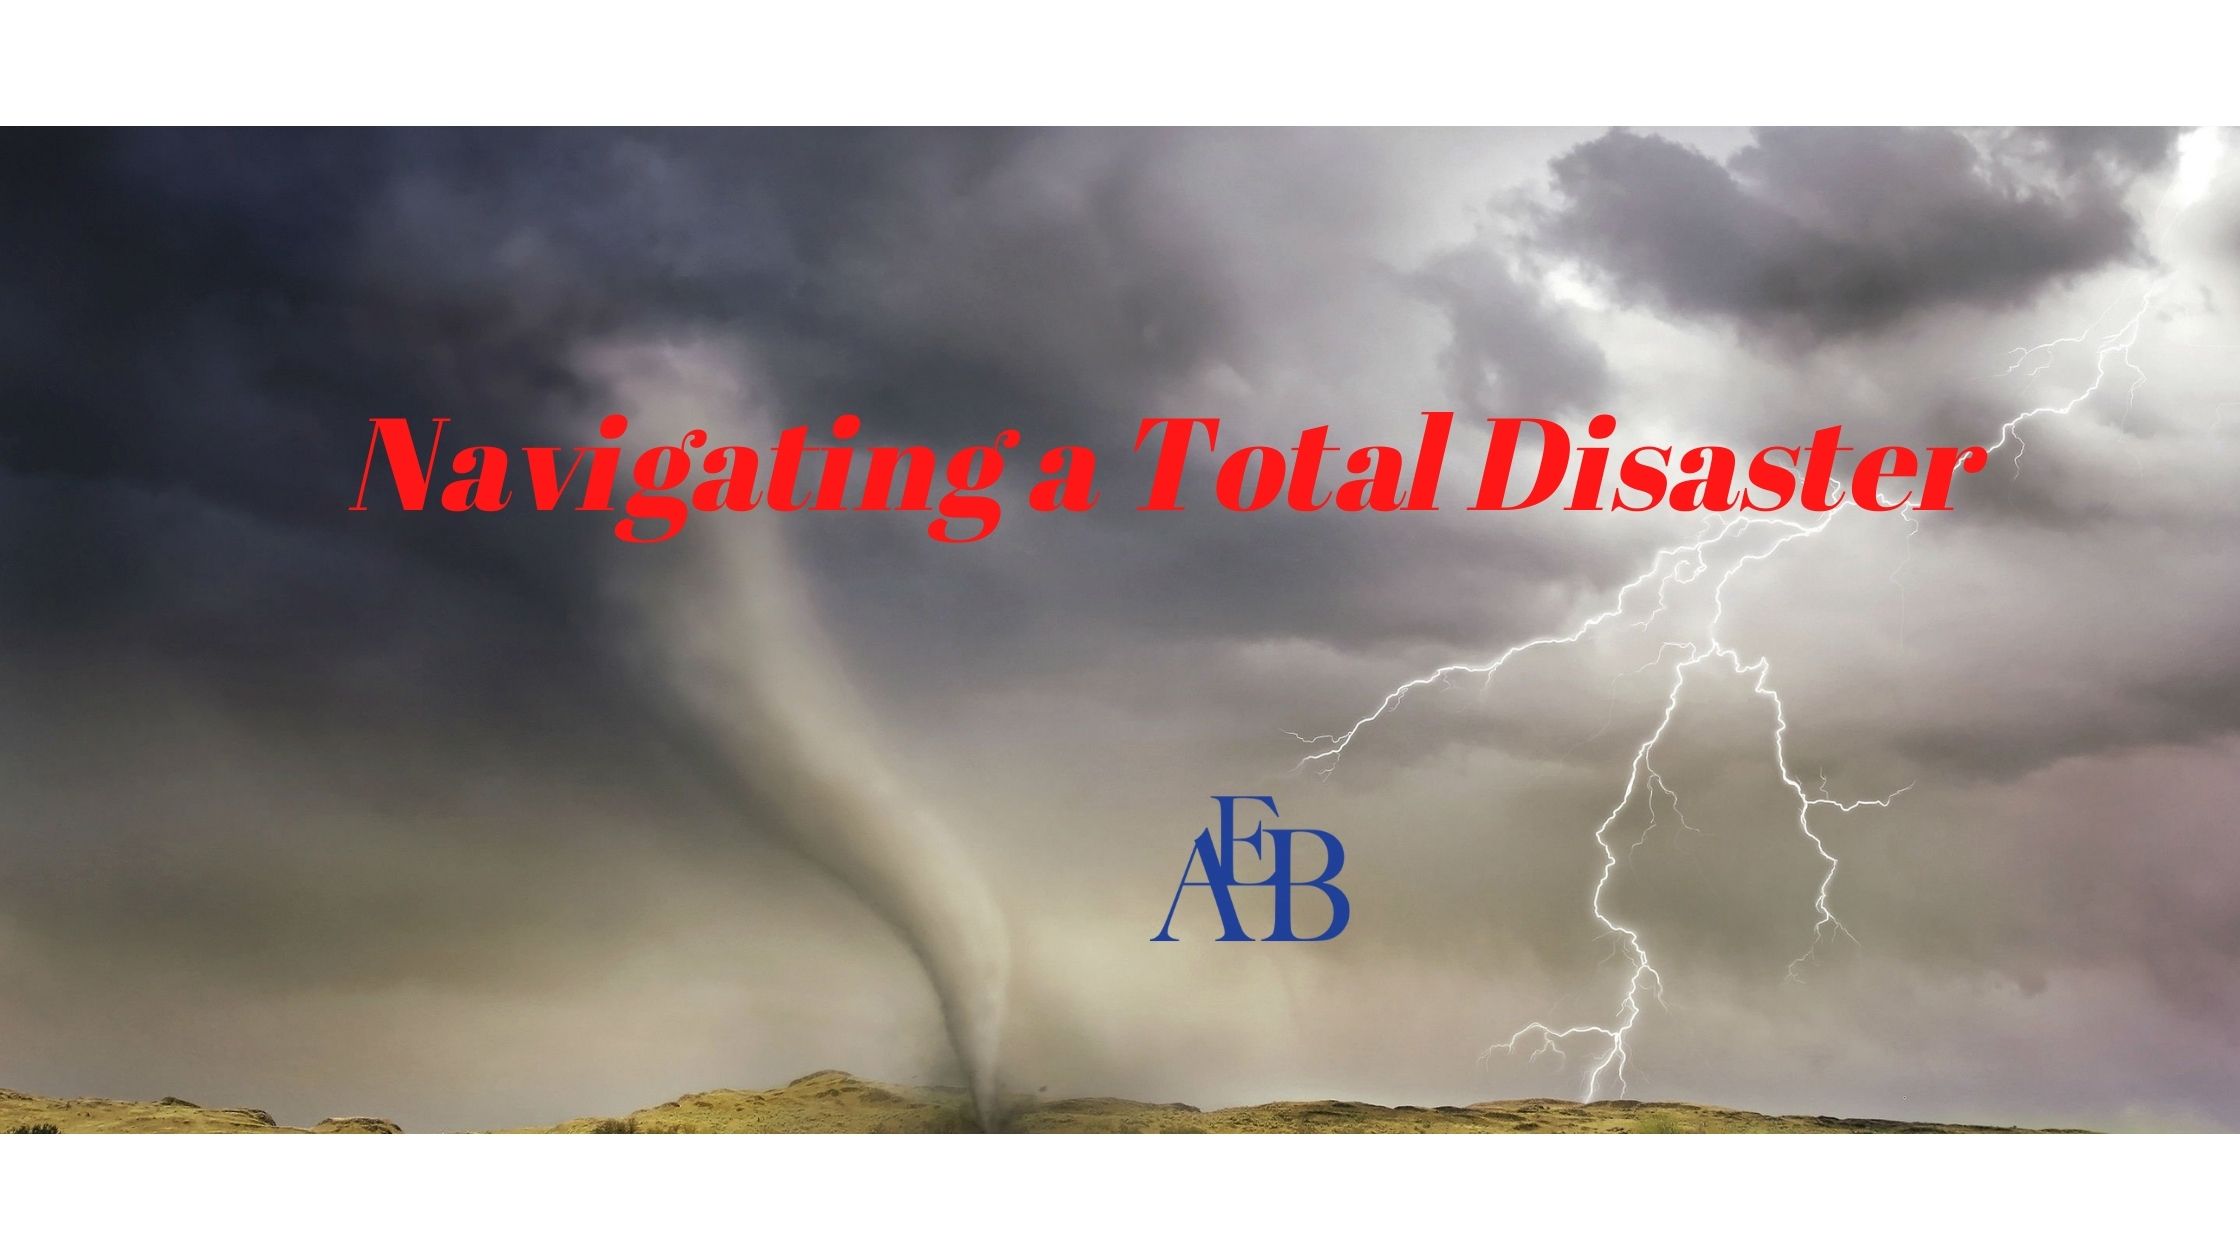 AEB - Your Advocate to Manage a Total Disaster